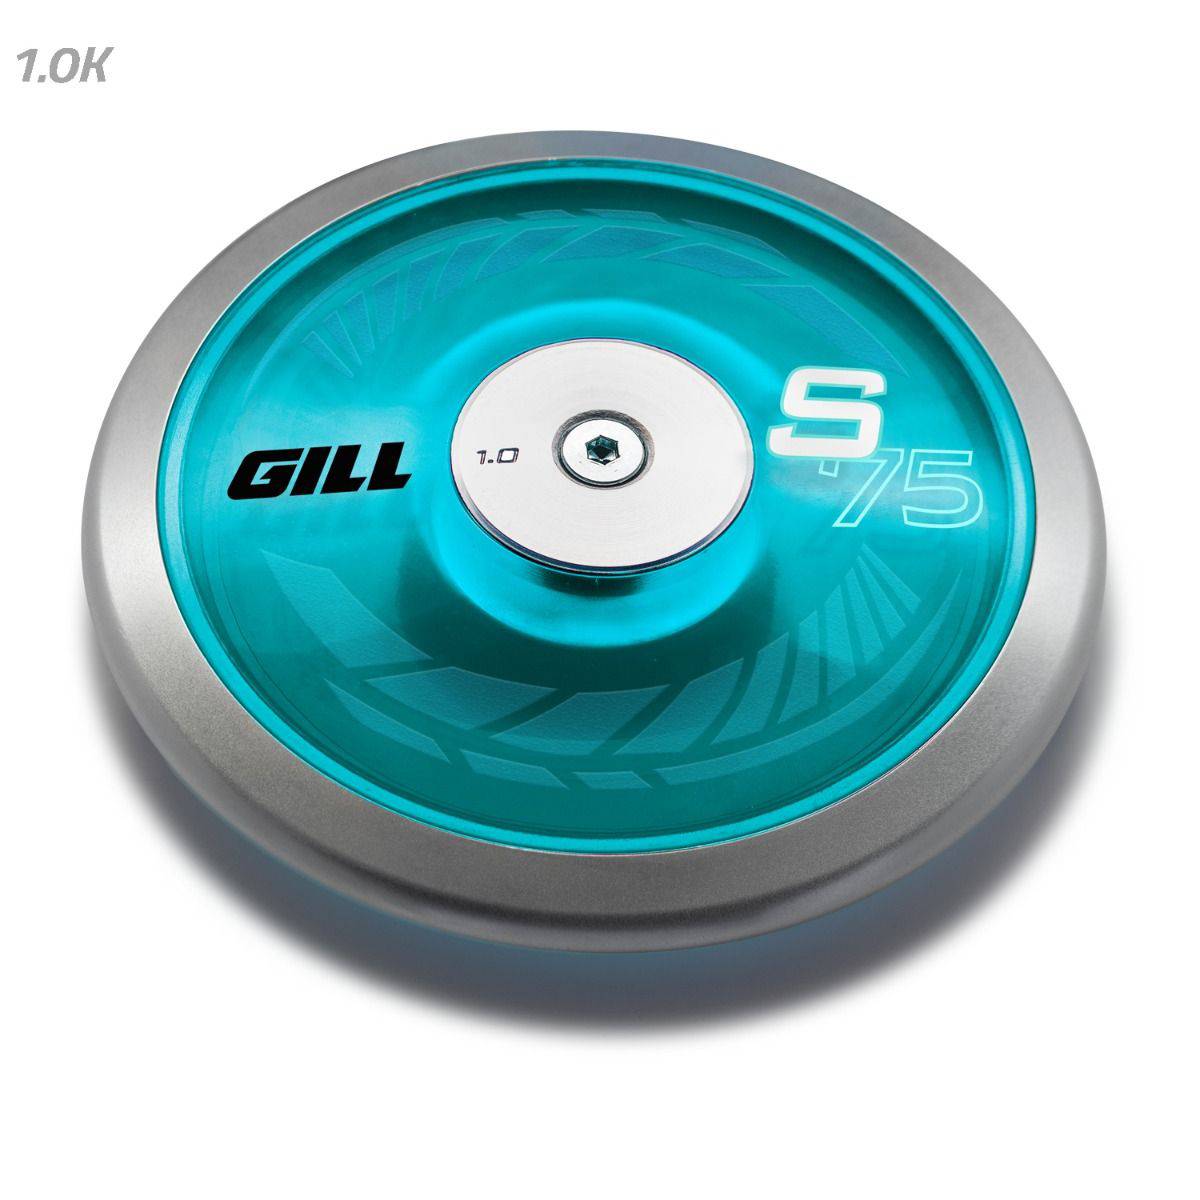 Gill Athletics 1.0K S75 Teal Discus